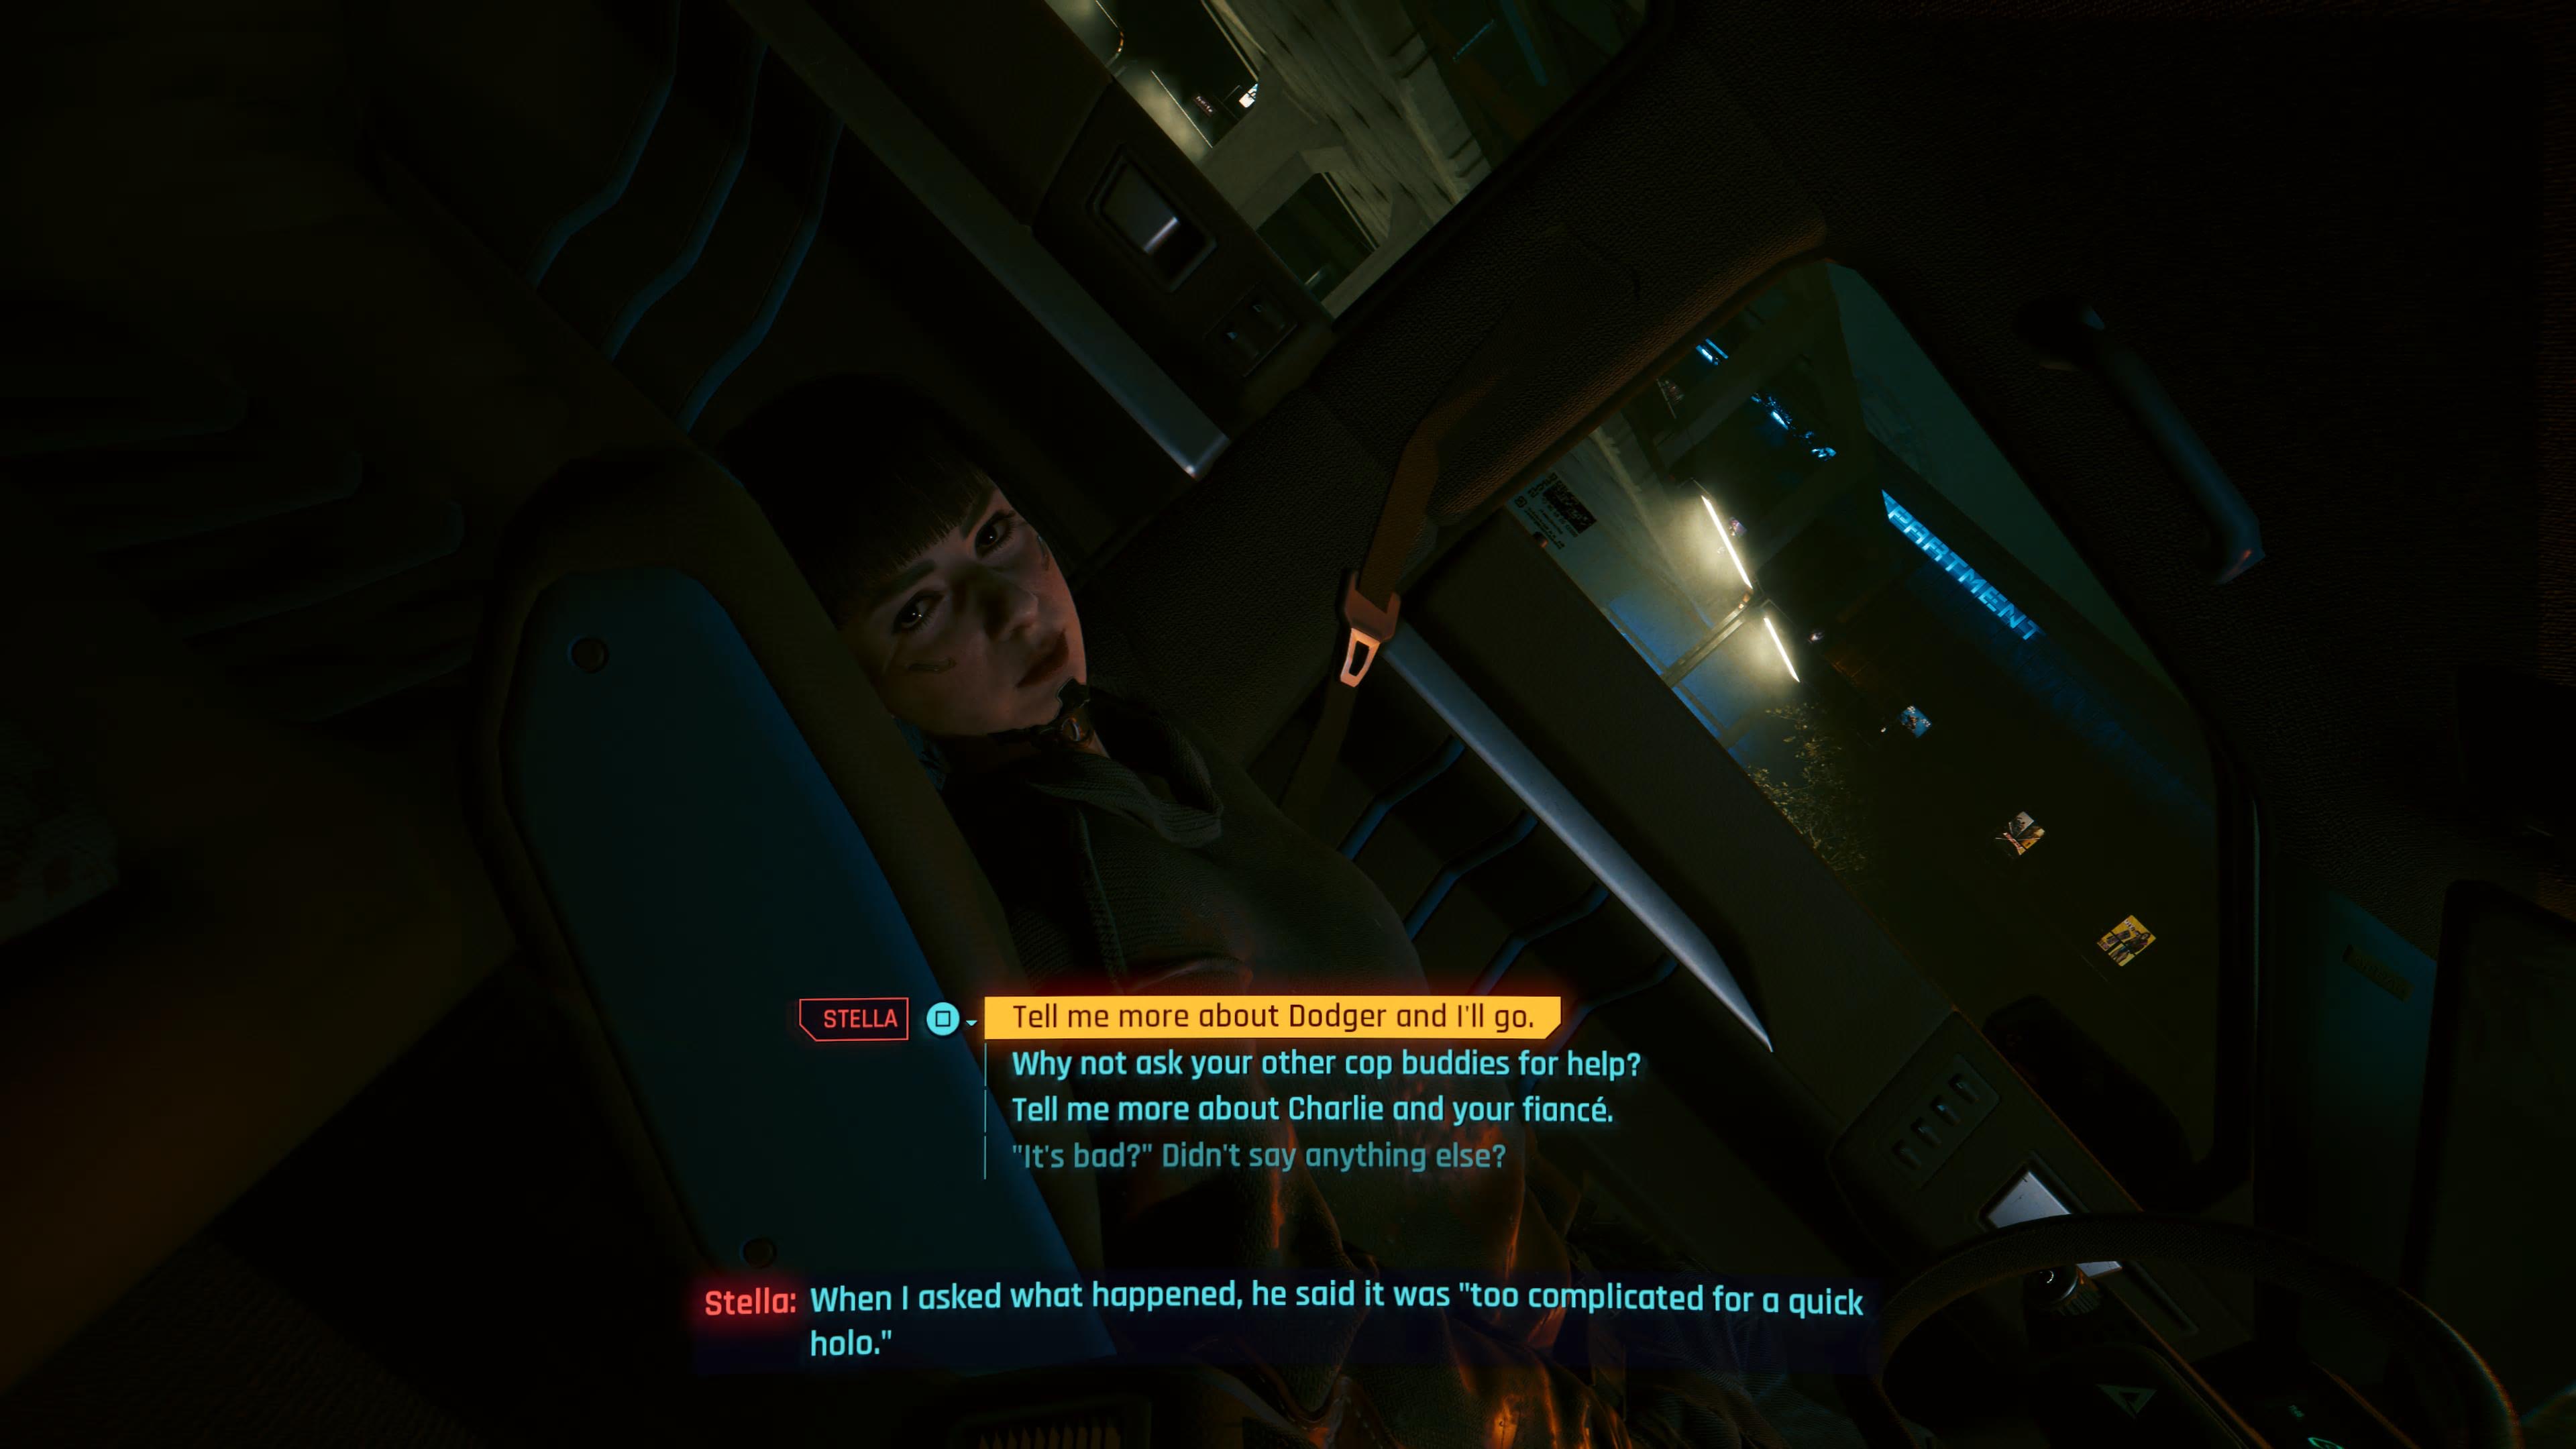 An in game screenshot of the character Stella from the game Cyberpunk 2077